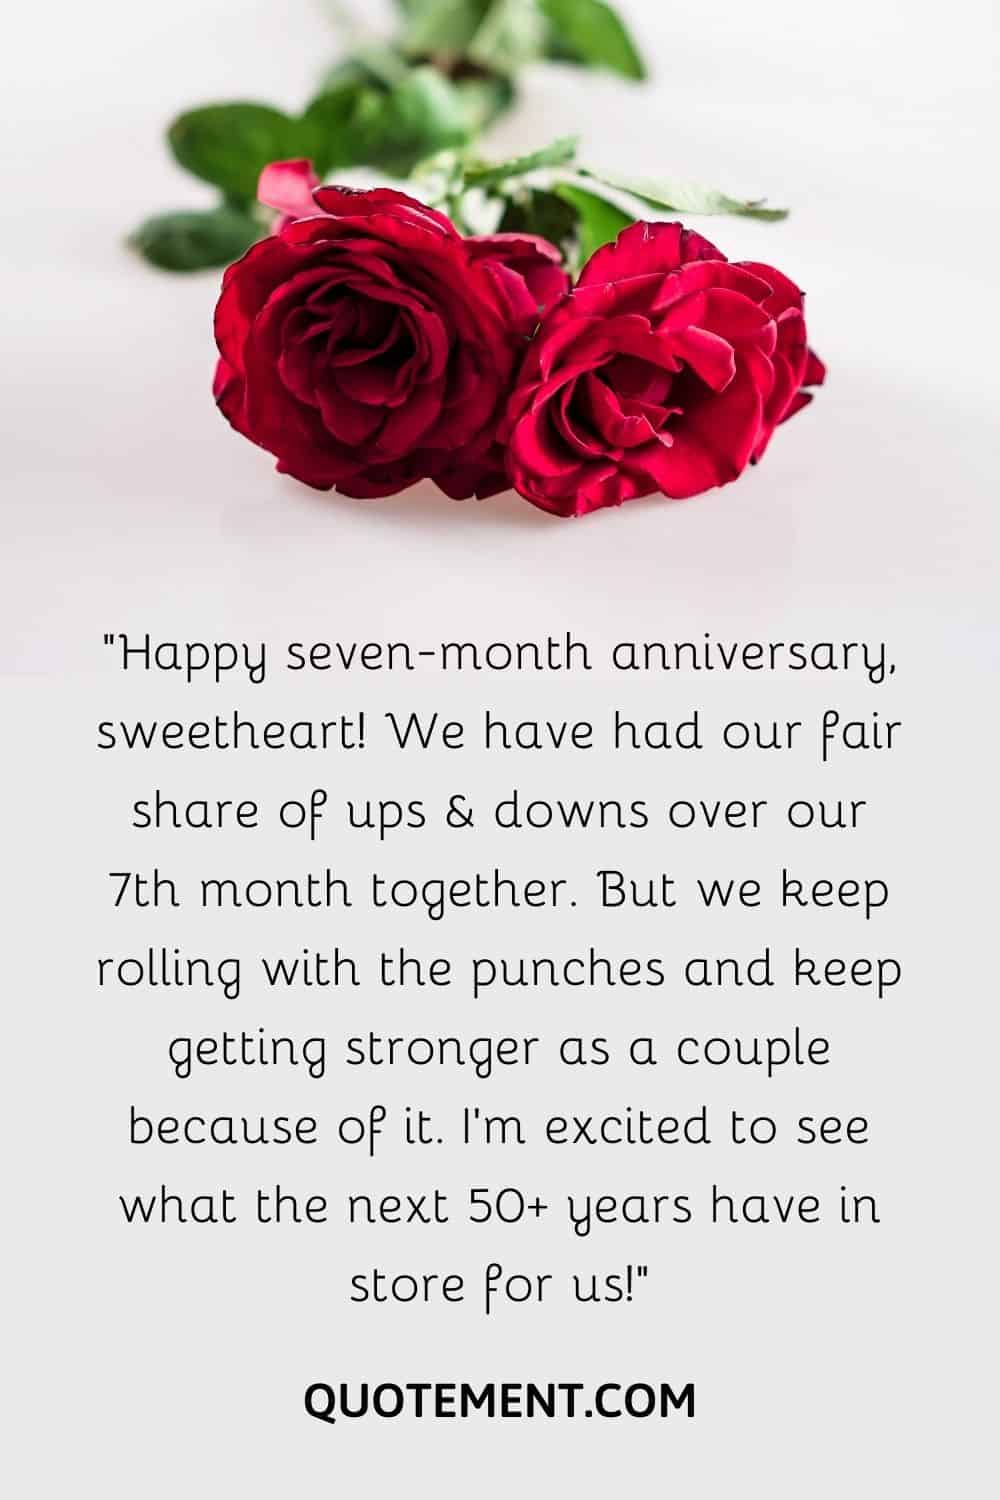 Happy seven-month anniversary, sweetheart!